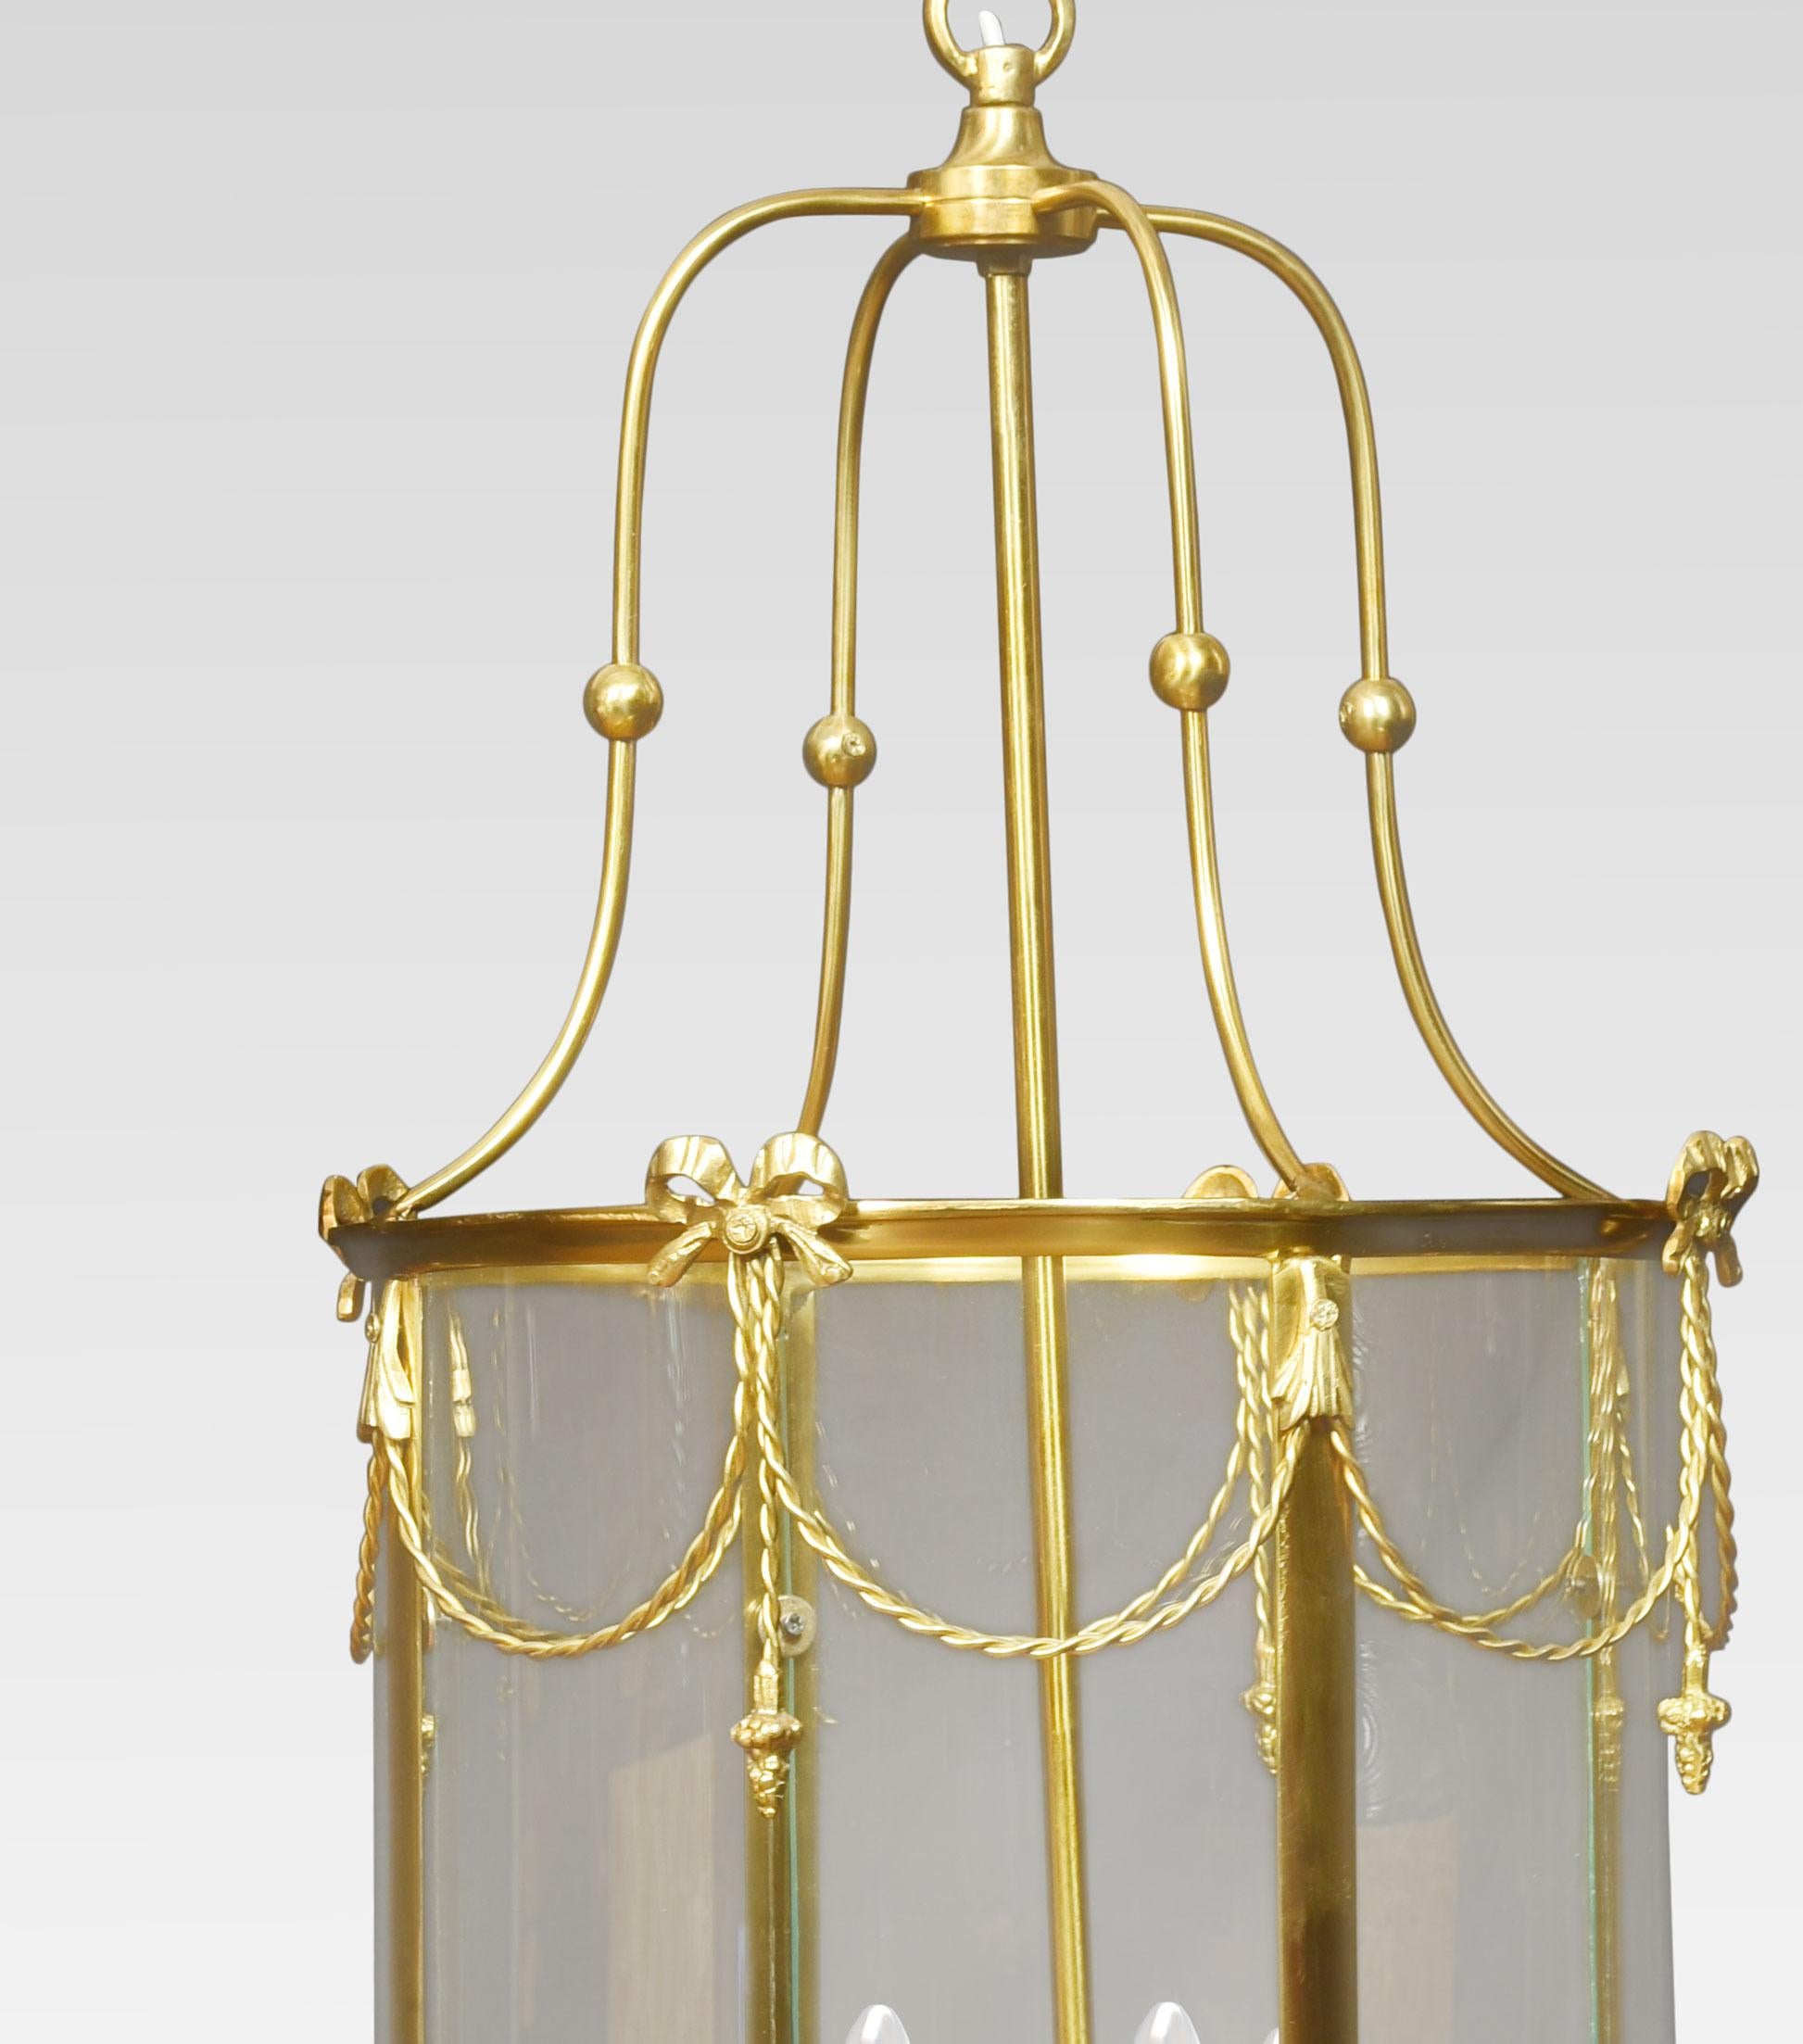 Pair of hall lanterns, the scrolling superstructure above a circular glazed body, with swag and bow decoration. enclosing a four-light electrolier. The lanterns have been rewired.
Dimensions
Height 33 Inches
Width 16.5 Inches
Depth 16.5 Inches.